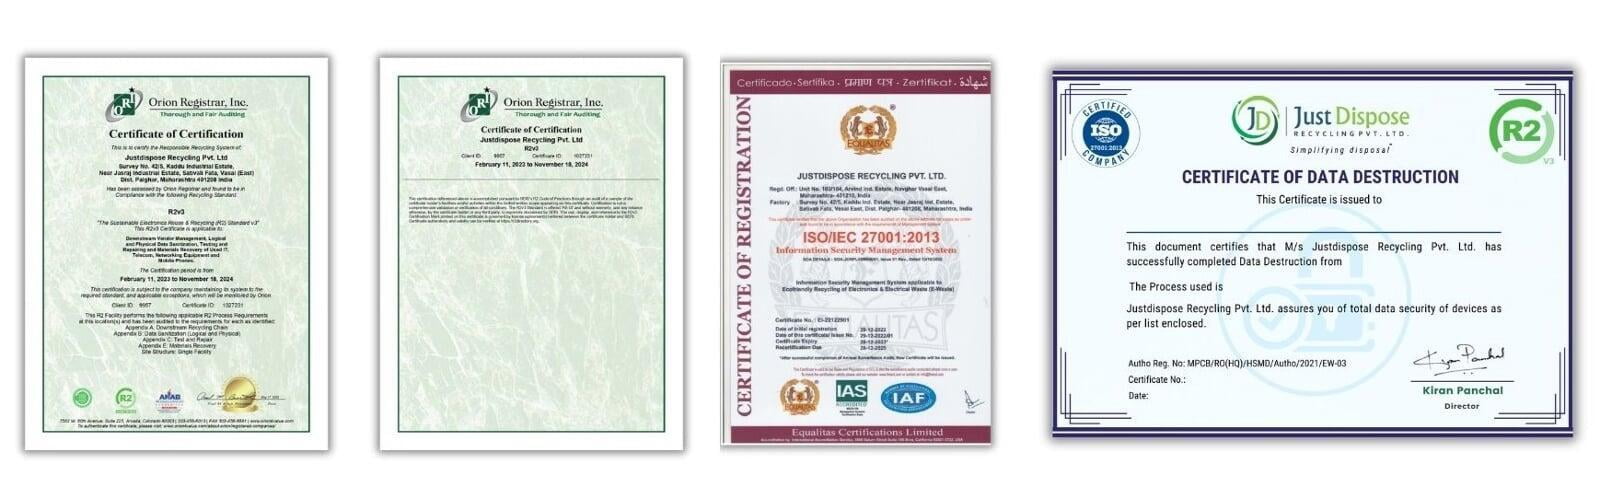 Certifications: R2v3, ISO 27001:2013, Environmental & Data Protection Compliance, Business Licenses. Demonstrating our commitment.